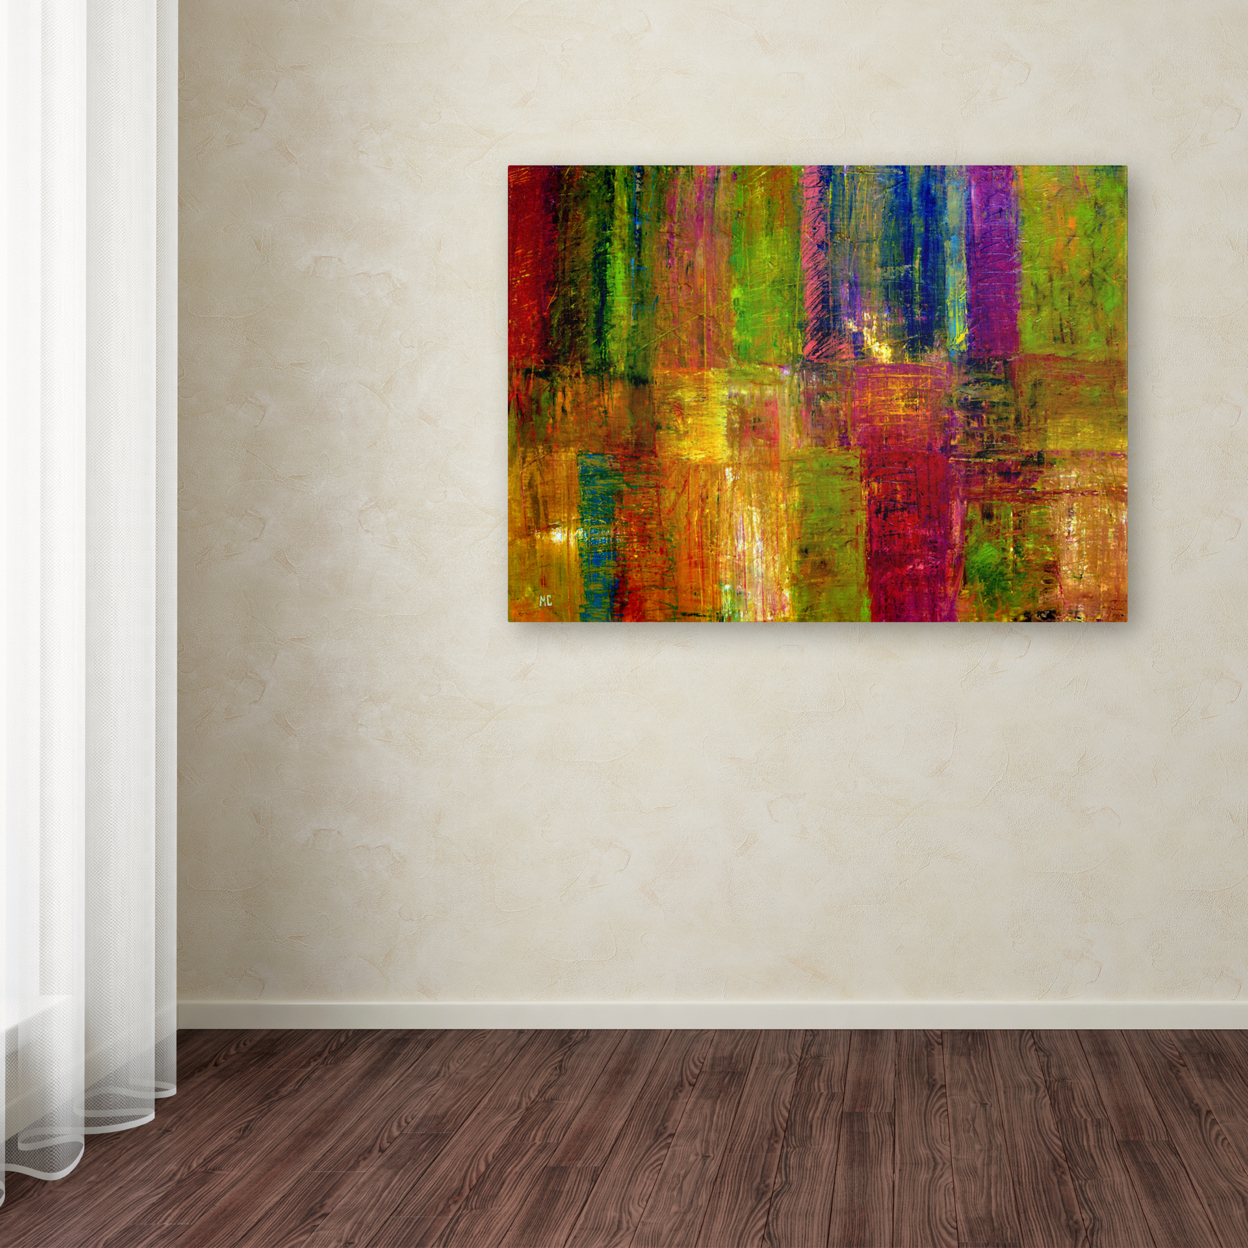 Michelle Calkins 'Color Abstract' Canvas Wall Art 35 X 47